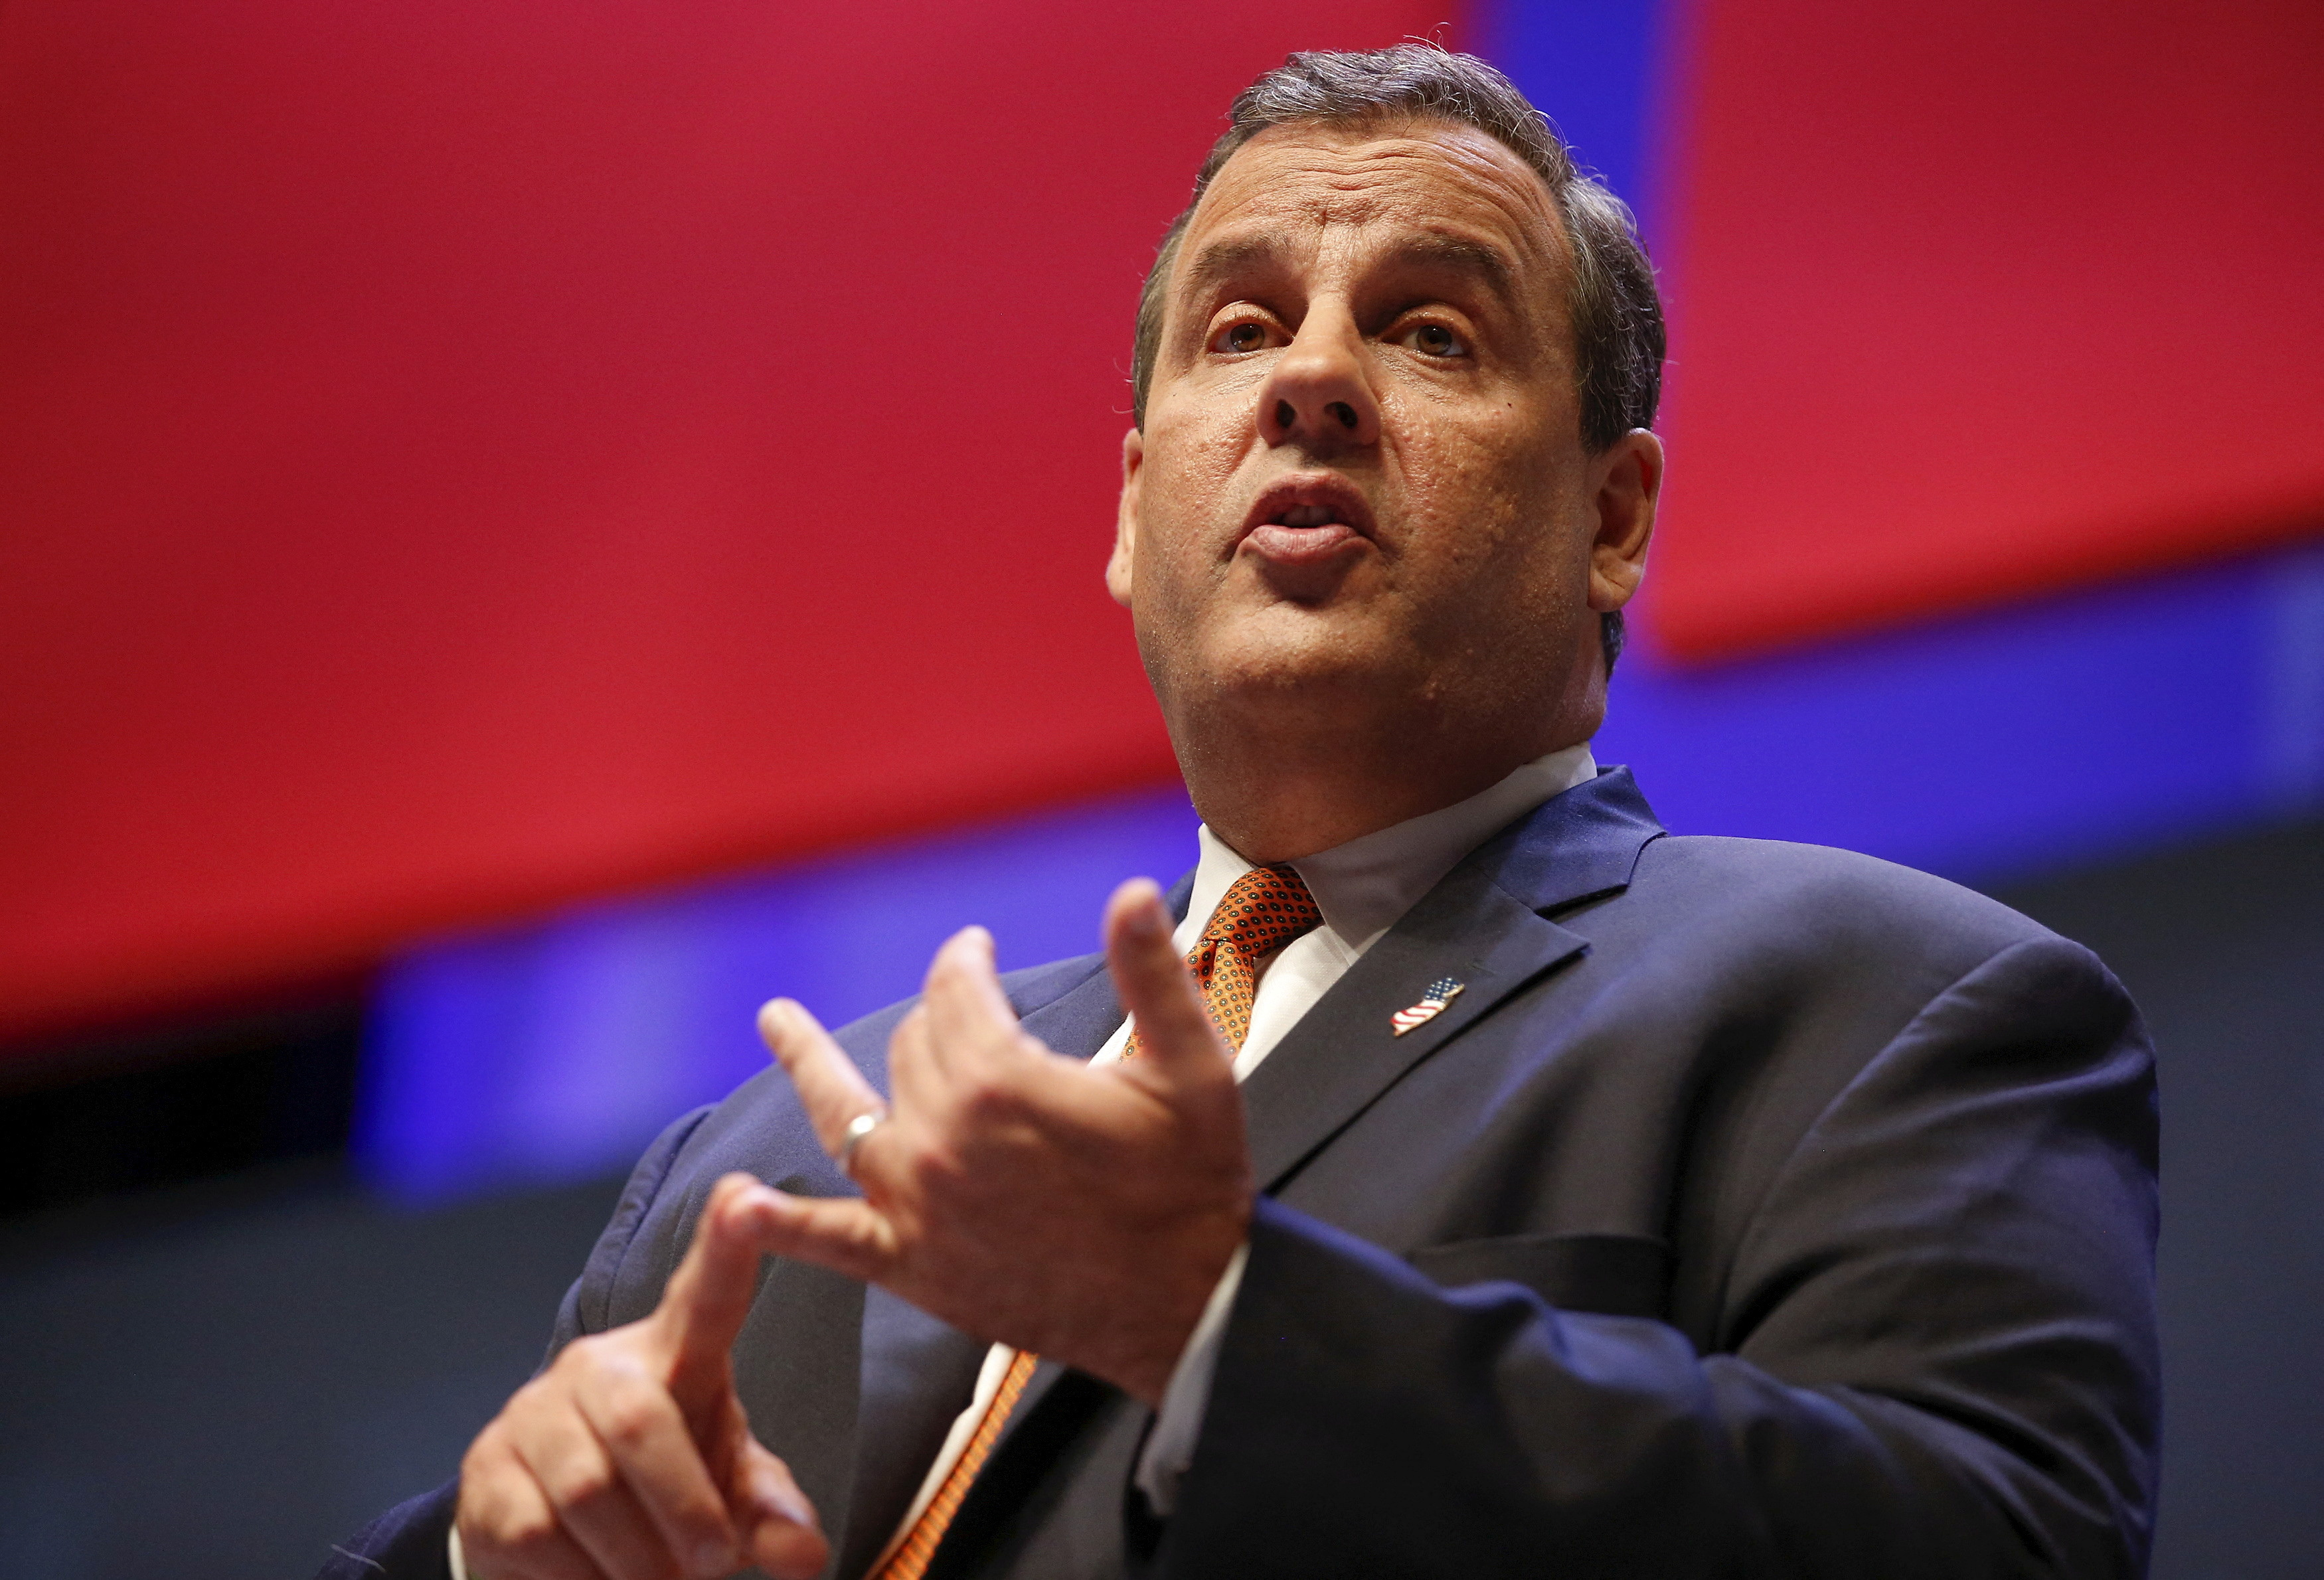 U.S. Republican presidential candidate Christie speaks during the Heritage Action for America presidential candidate forum in Greenville